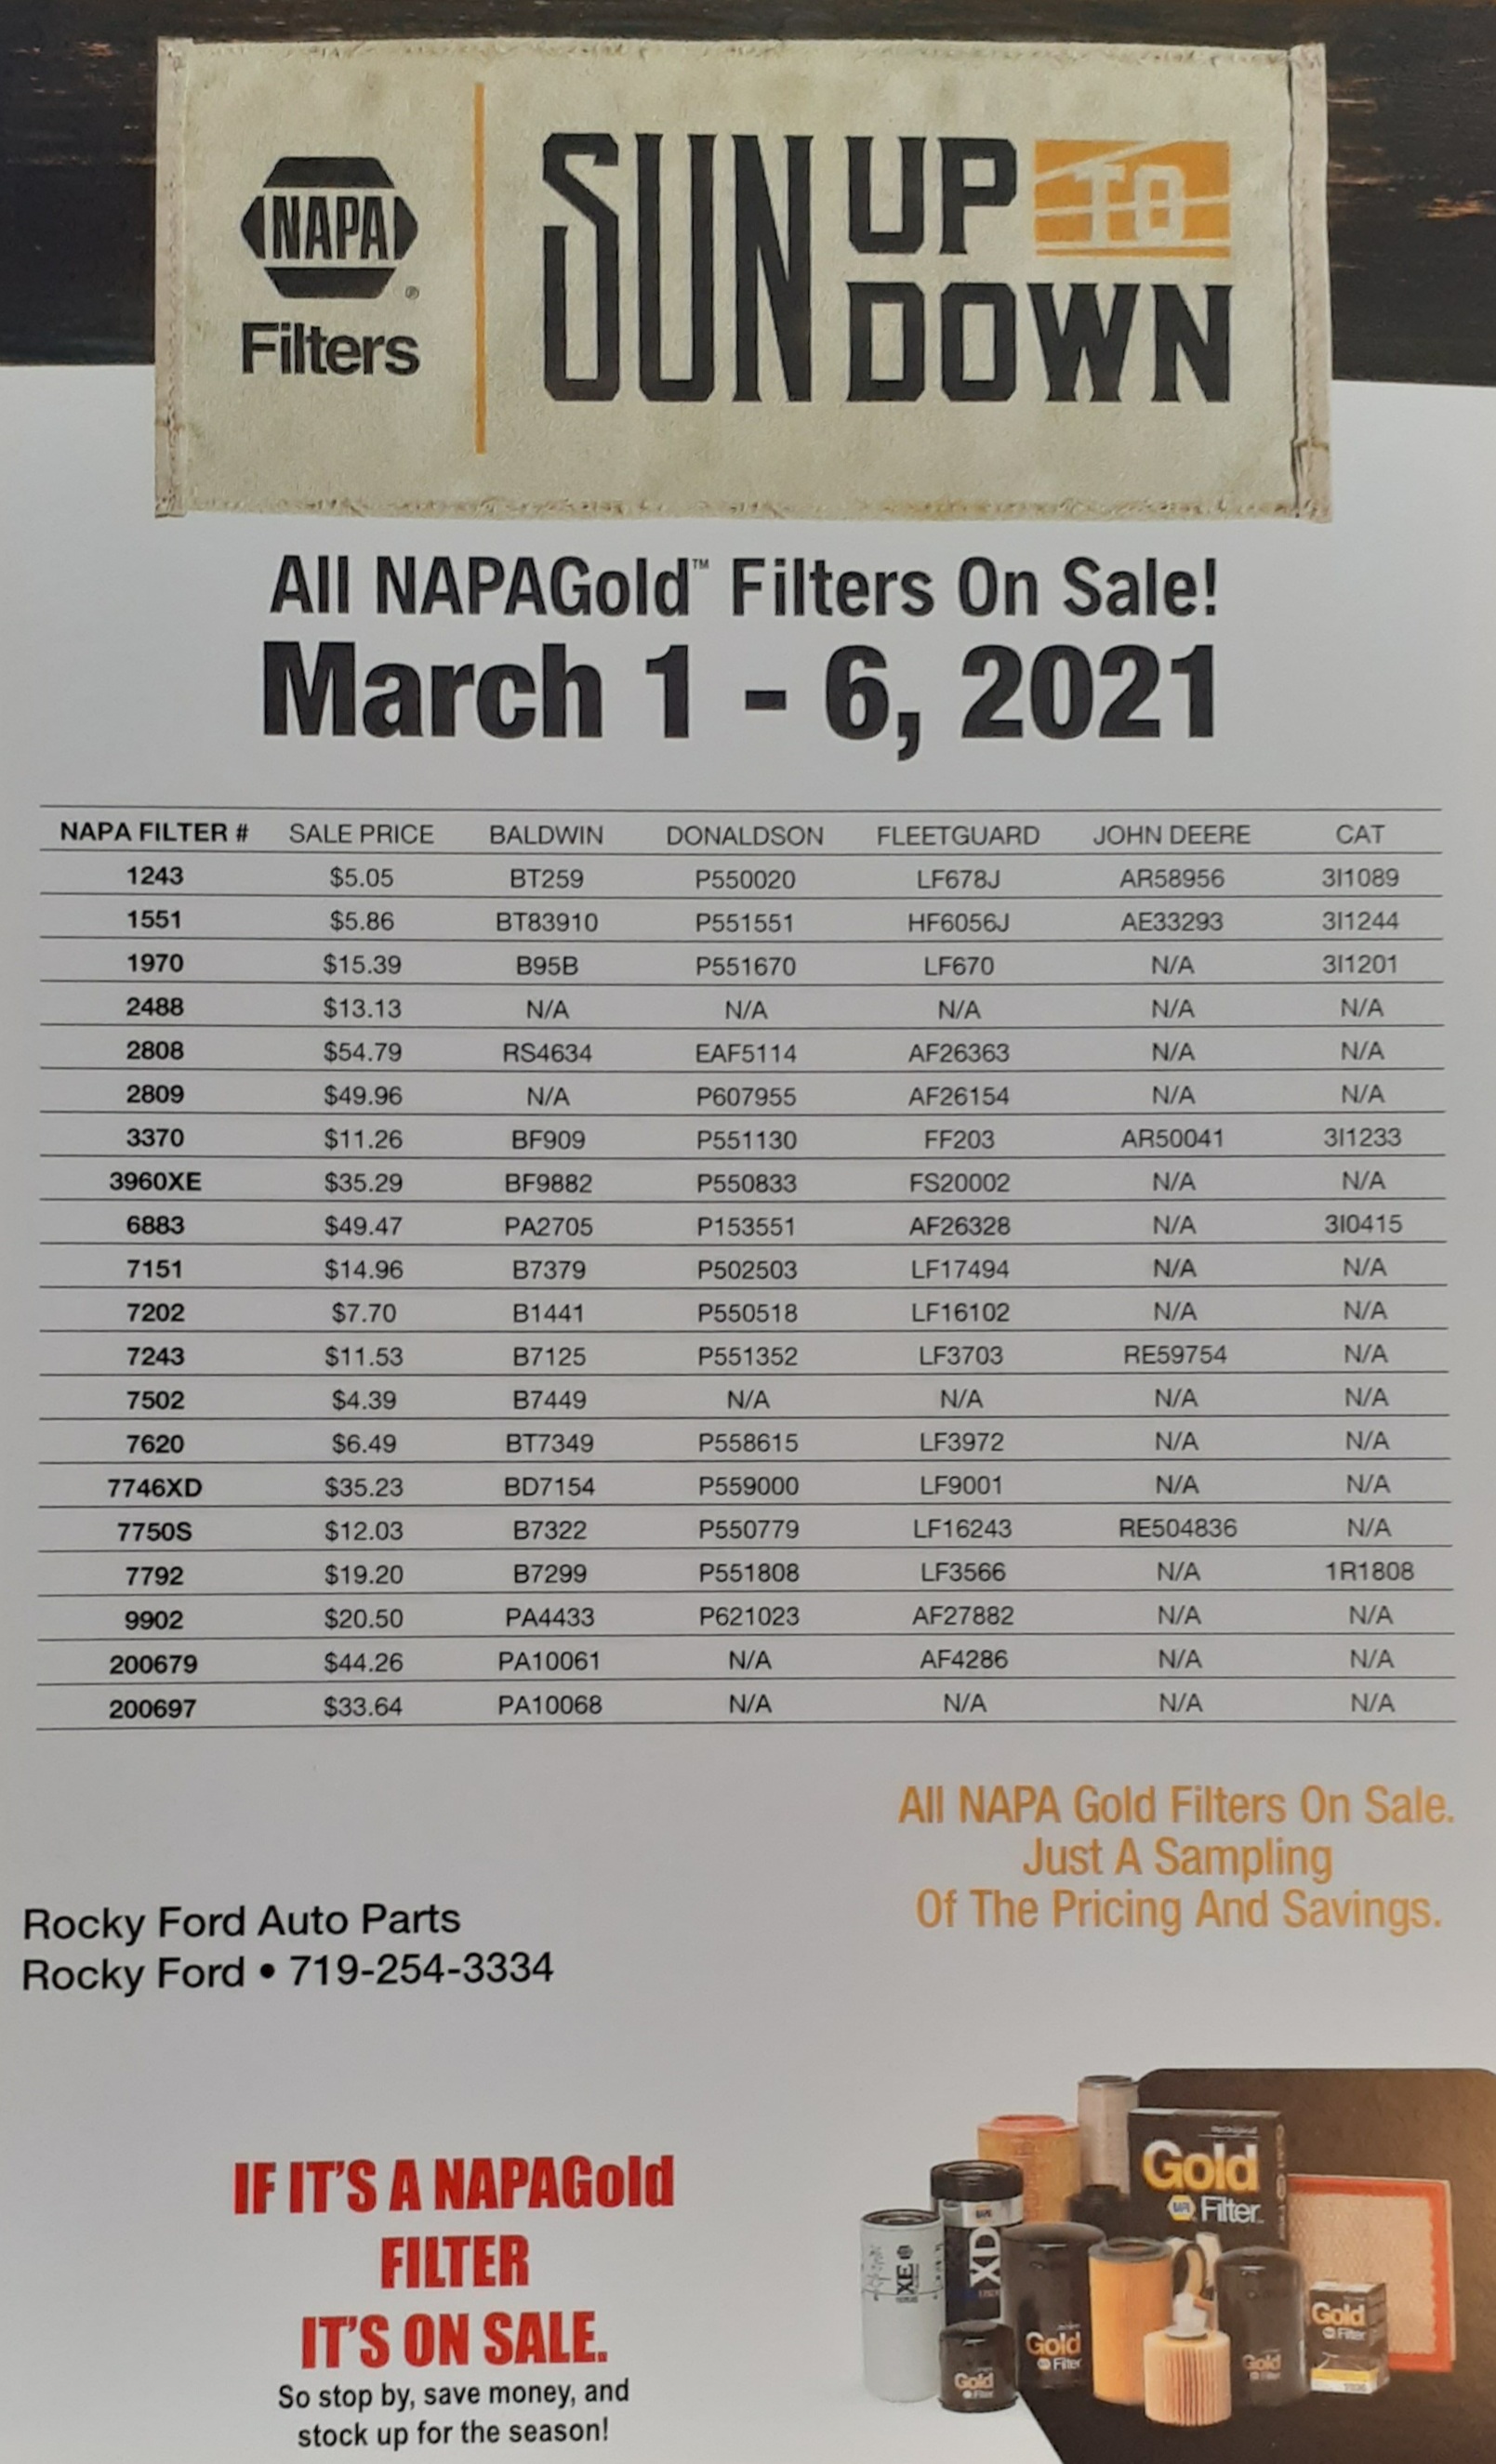 Rocky Ford Auto Parts NAPAGold Filter Sale